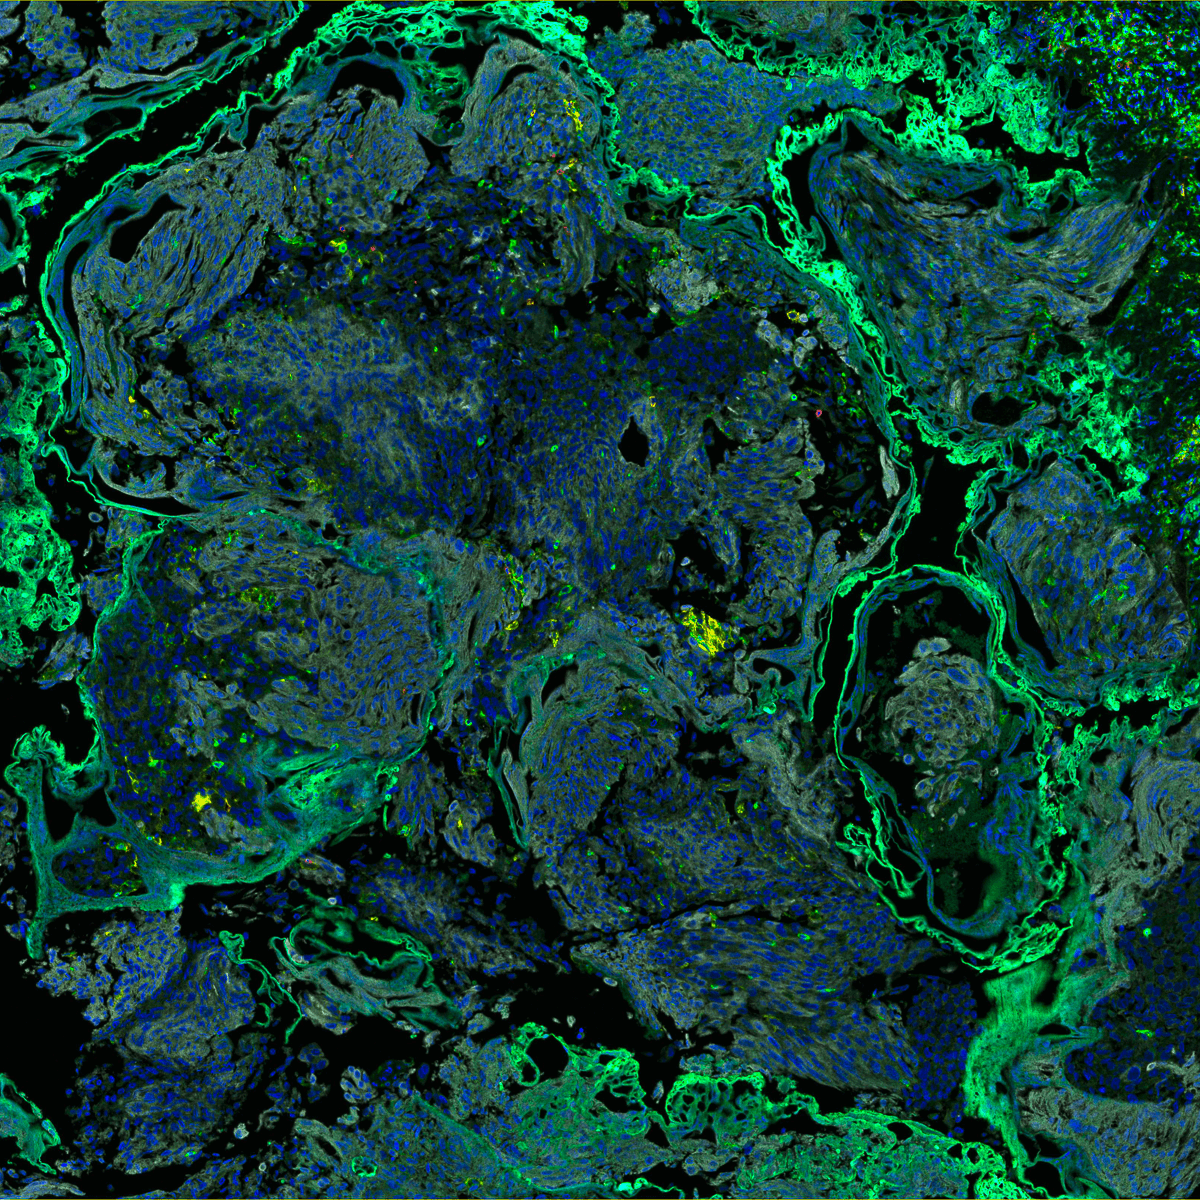 ICR Science and Medical Imaging Competition 2022 Shortlist Image 1: Islands - Immunofluorescence staining of bladder tumour tissue by PhD student Rose Foster